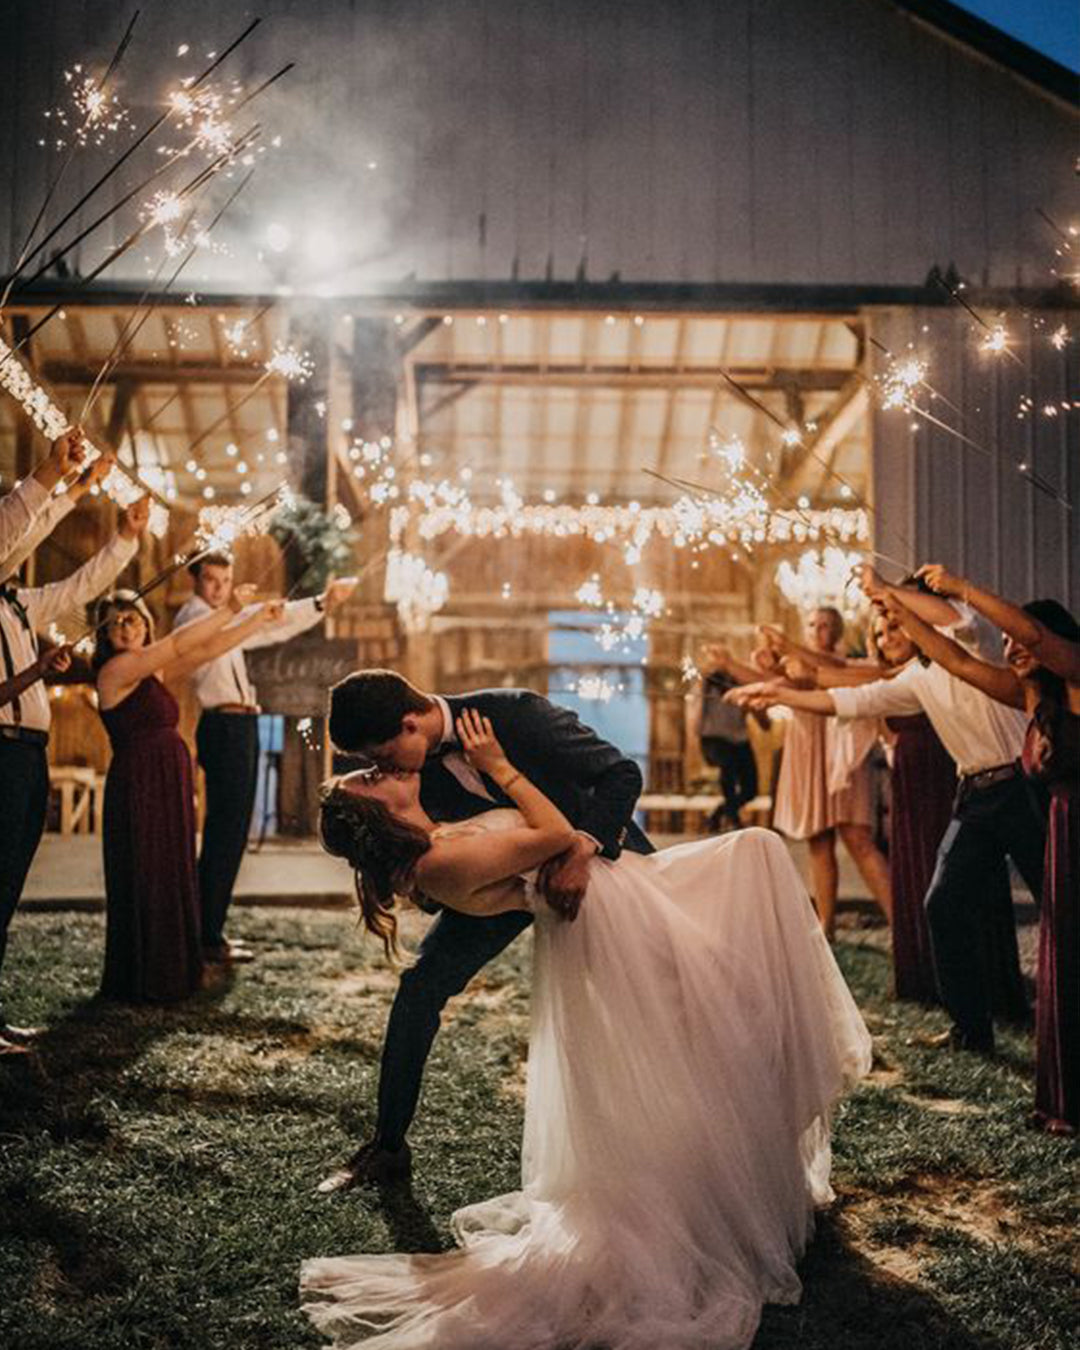 How To Find Big Sparklers For Weddings